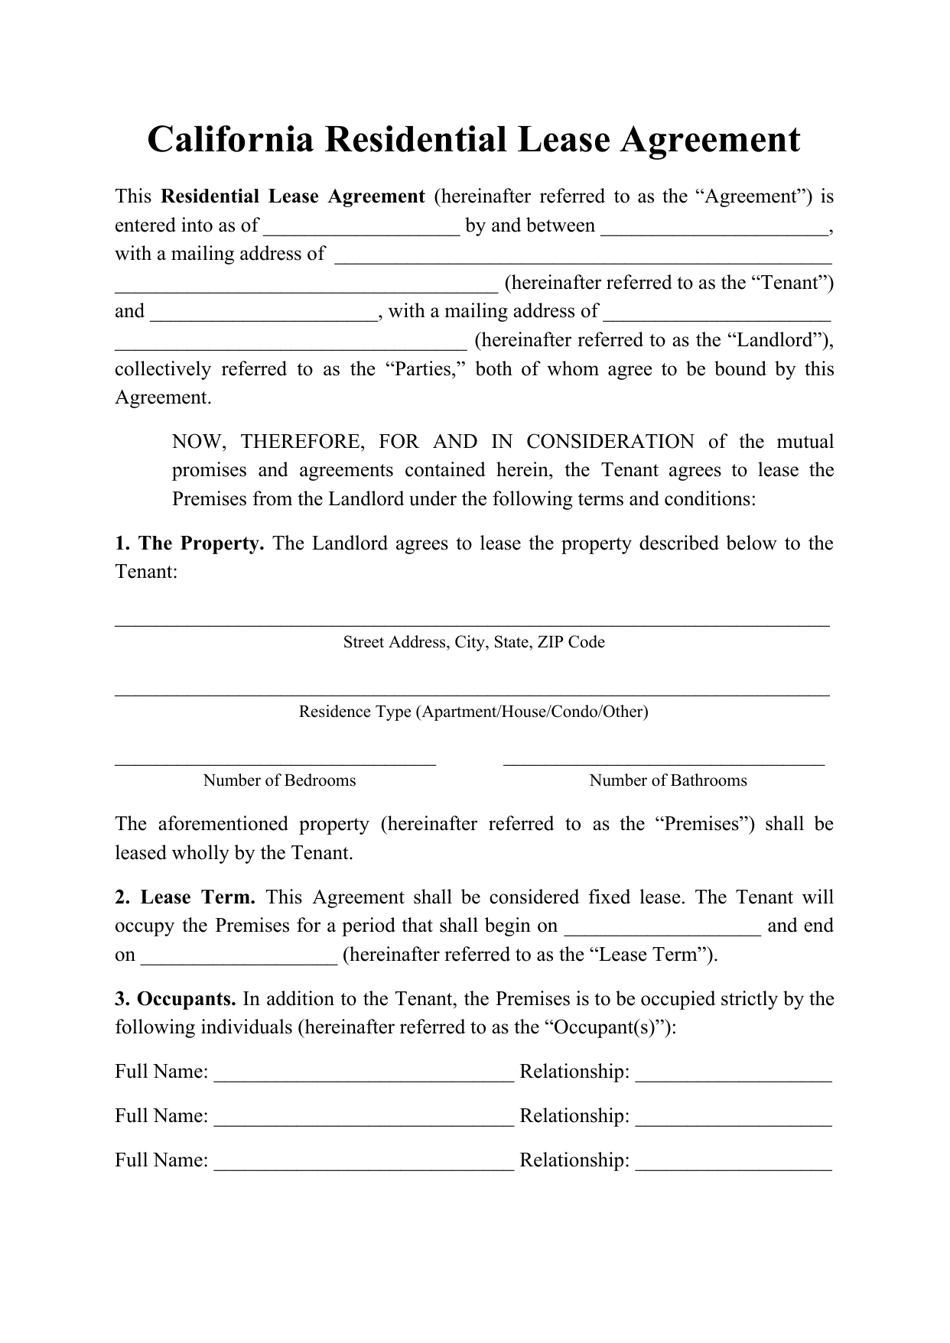 California Residential Lease Agreement Template Download Printable PDF